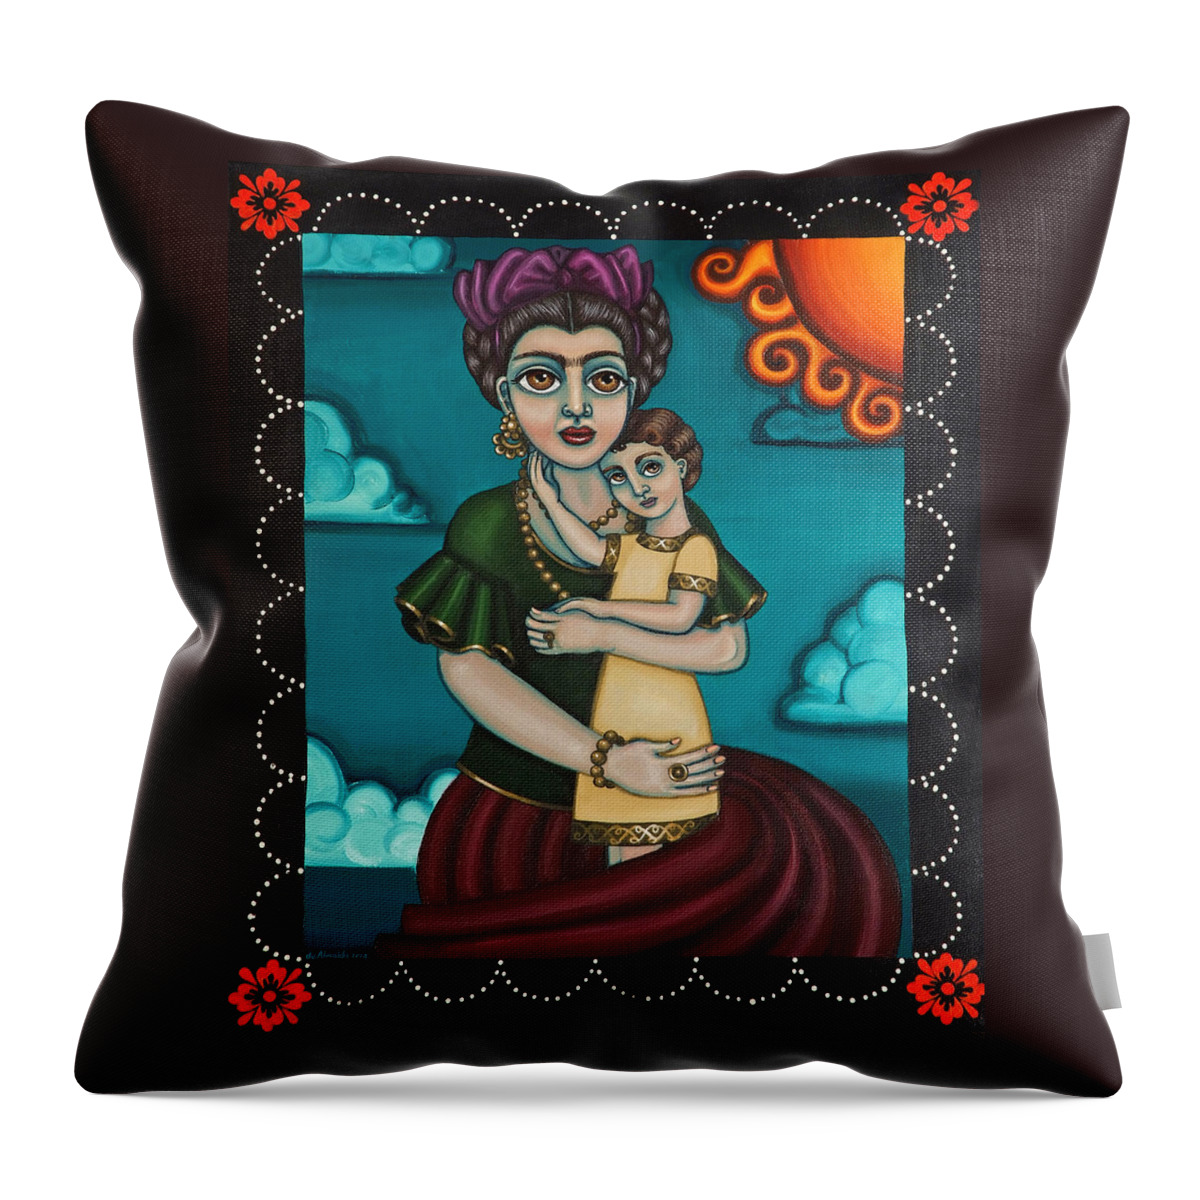 Folk Art Throw Pillow featuring the painting Holding Diegito by Victoria De Almeida